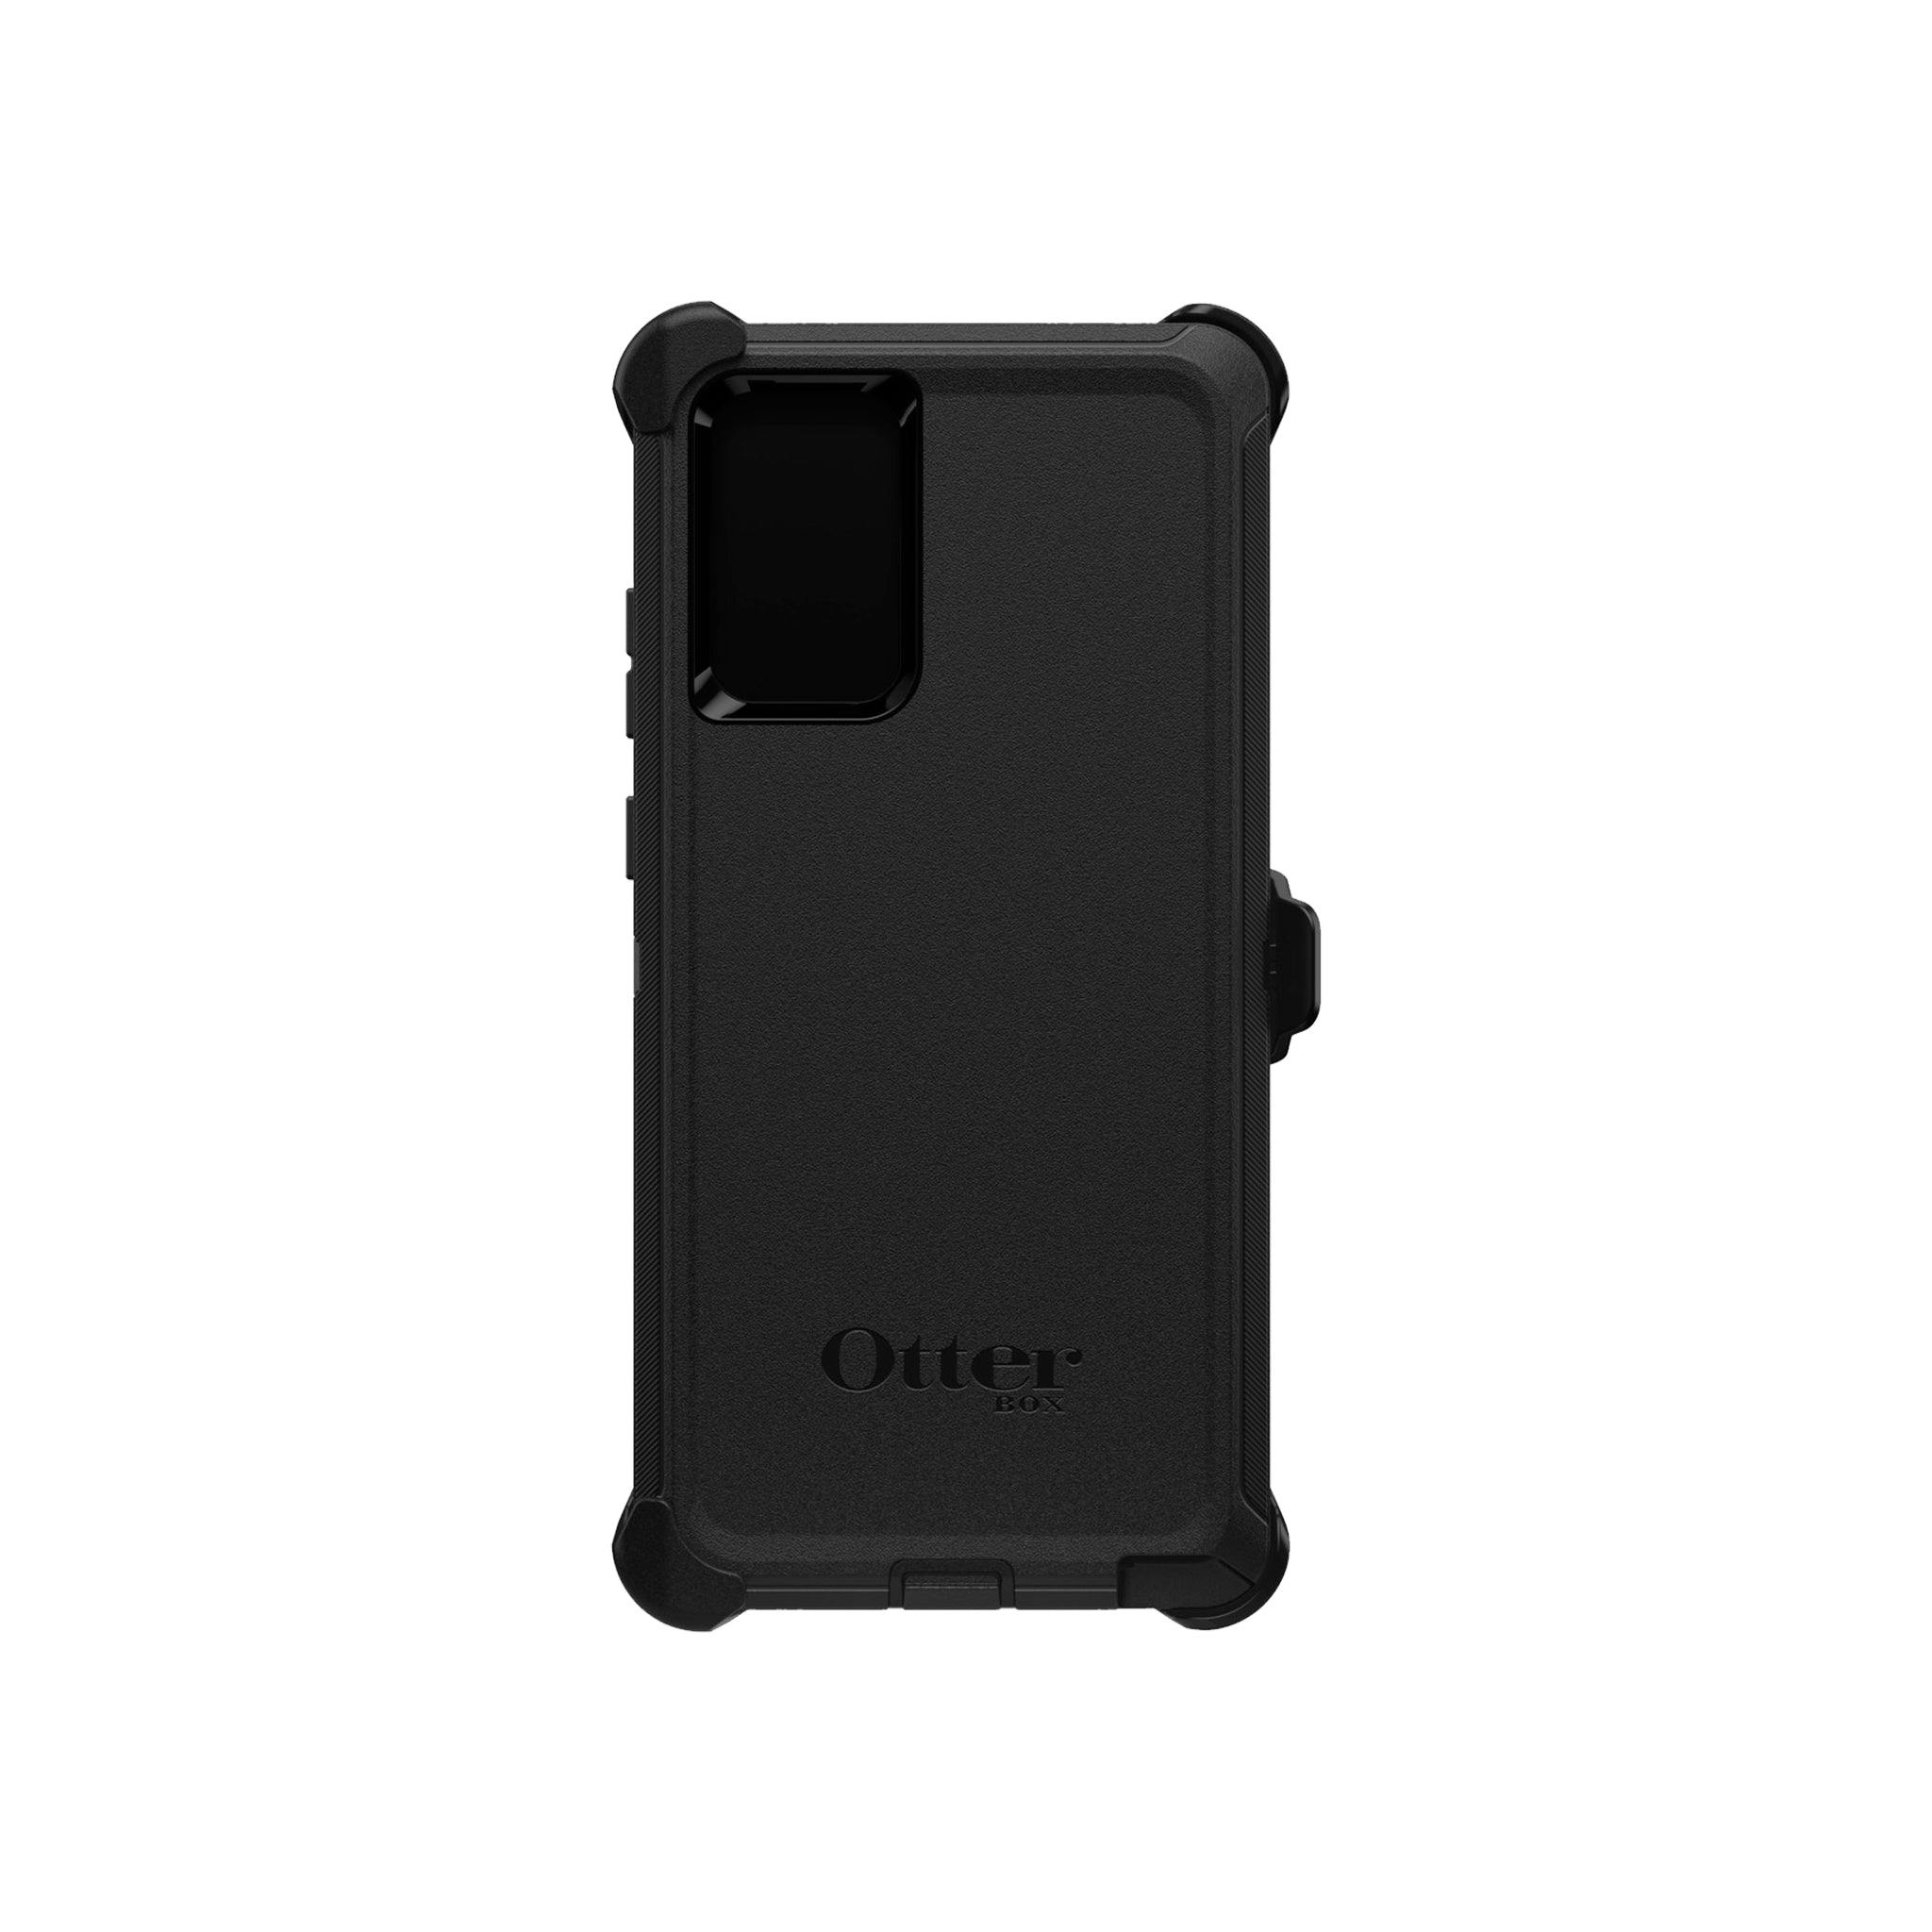 OtterBox, OtterBox - Defender Series Case for Galaxy Note 20 5G - Black